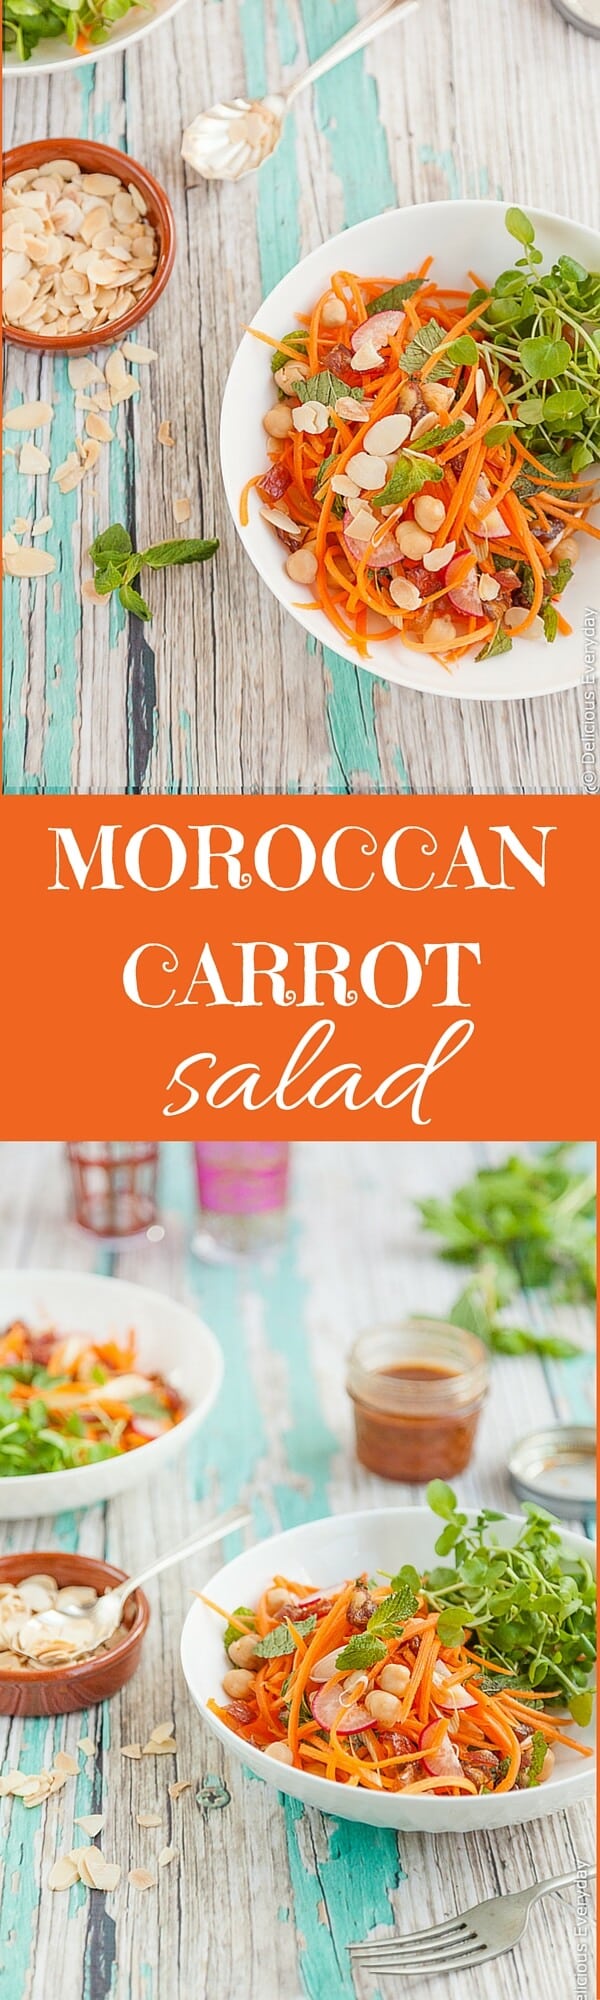 This Moroccan carrot and chickpea salad recipe is a hearty meal in a bowl and makes for a great packed lunch. Gluten-free and vegetarian (with a vegan option) it is so easy to throw together and packs a punch flavourwise! You’ll be making it again and again!